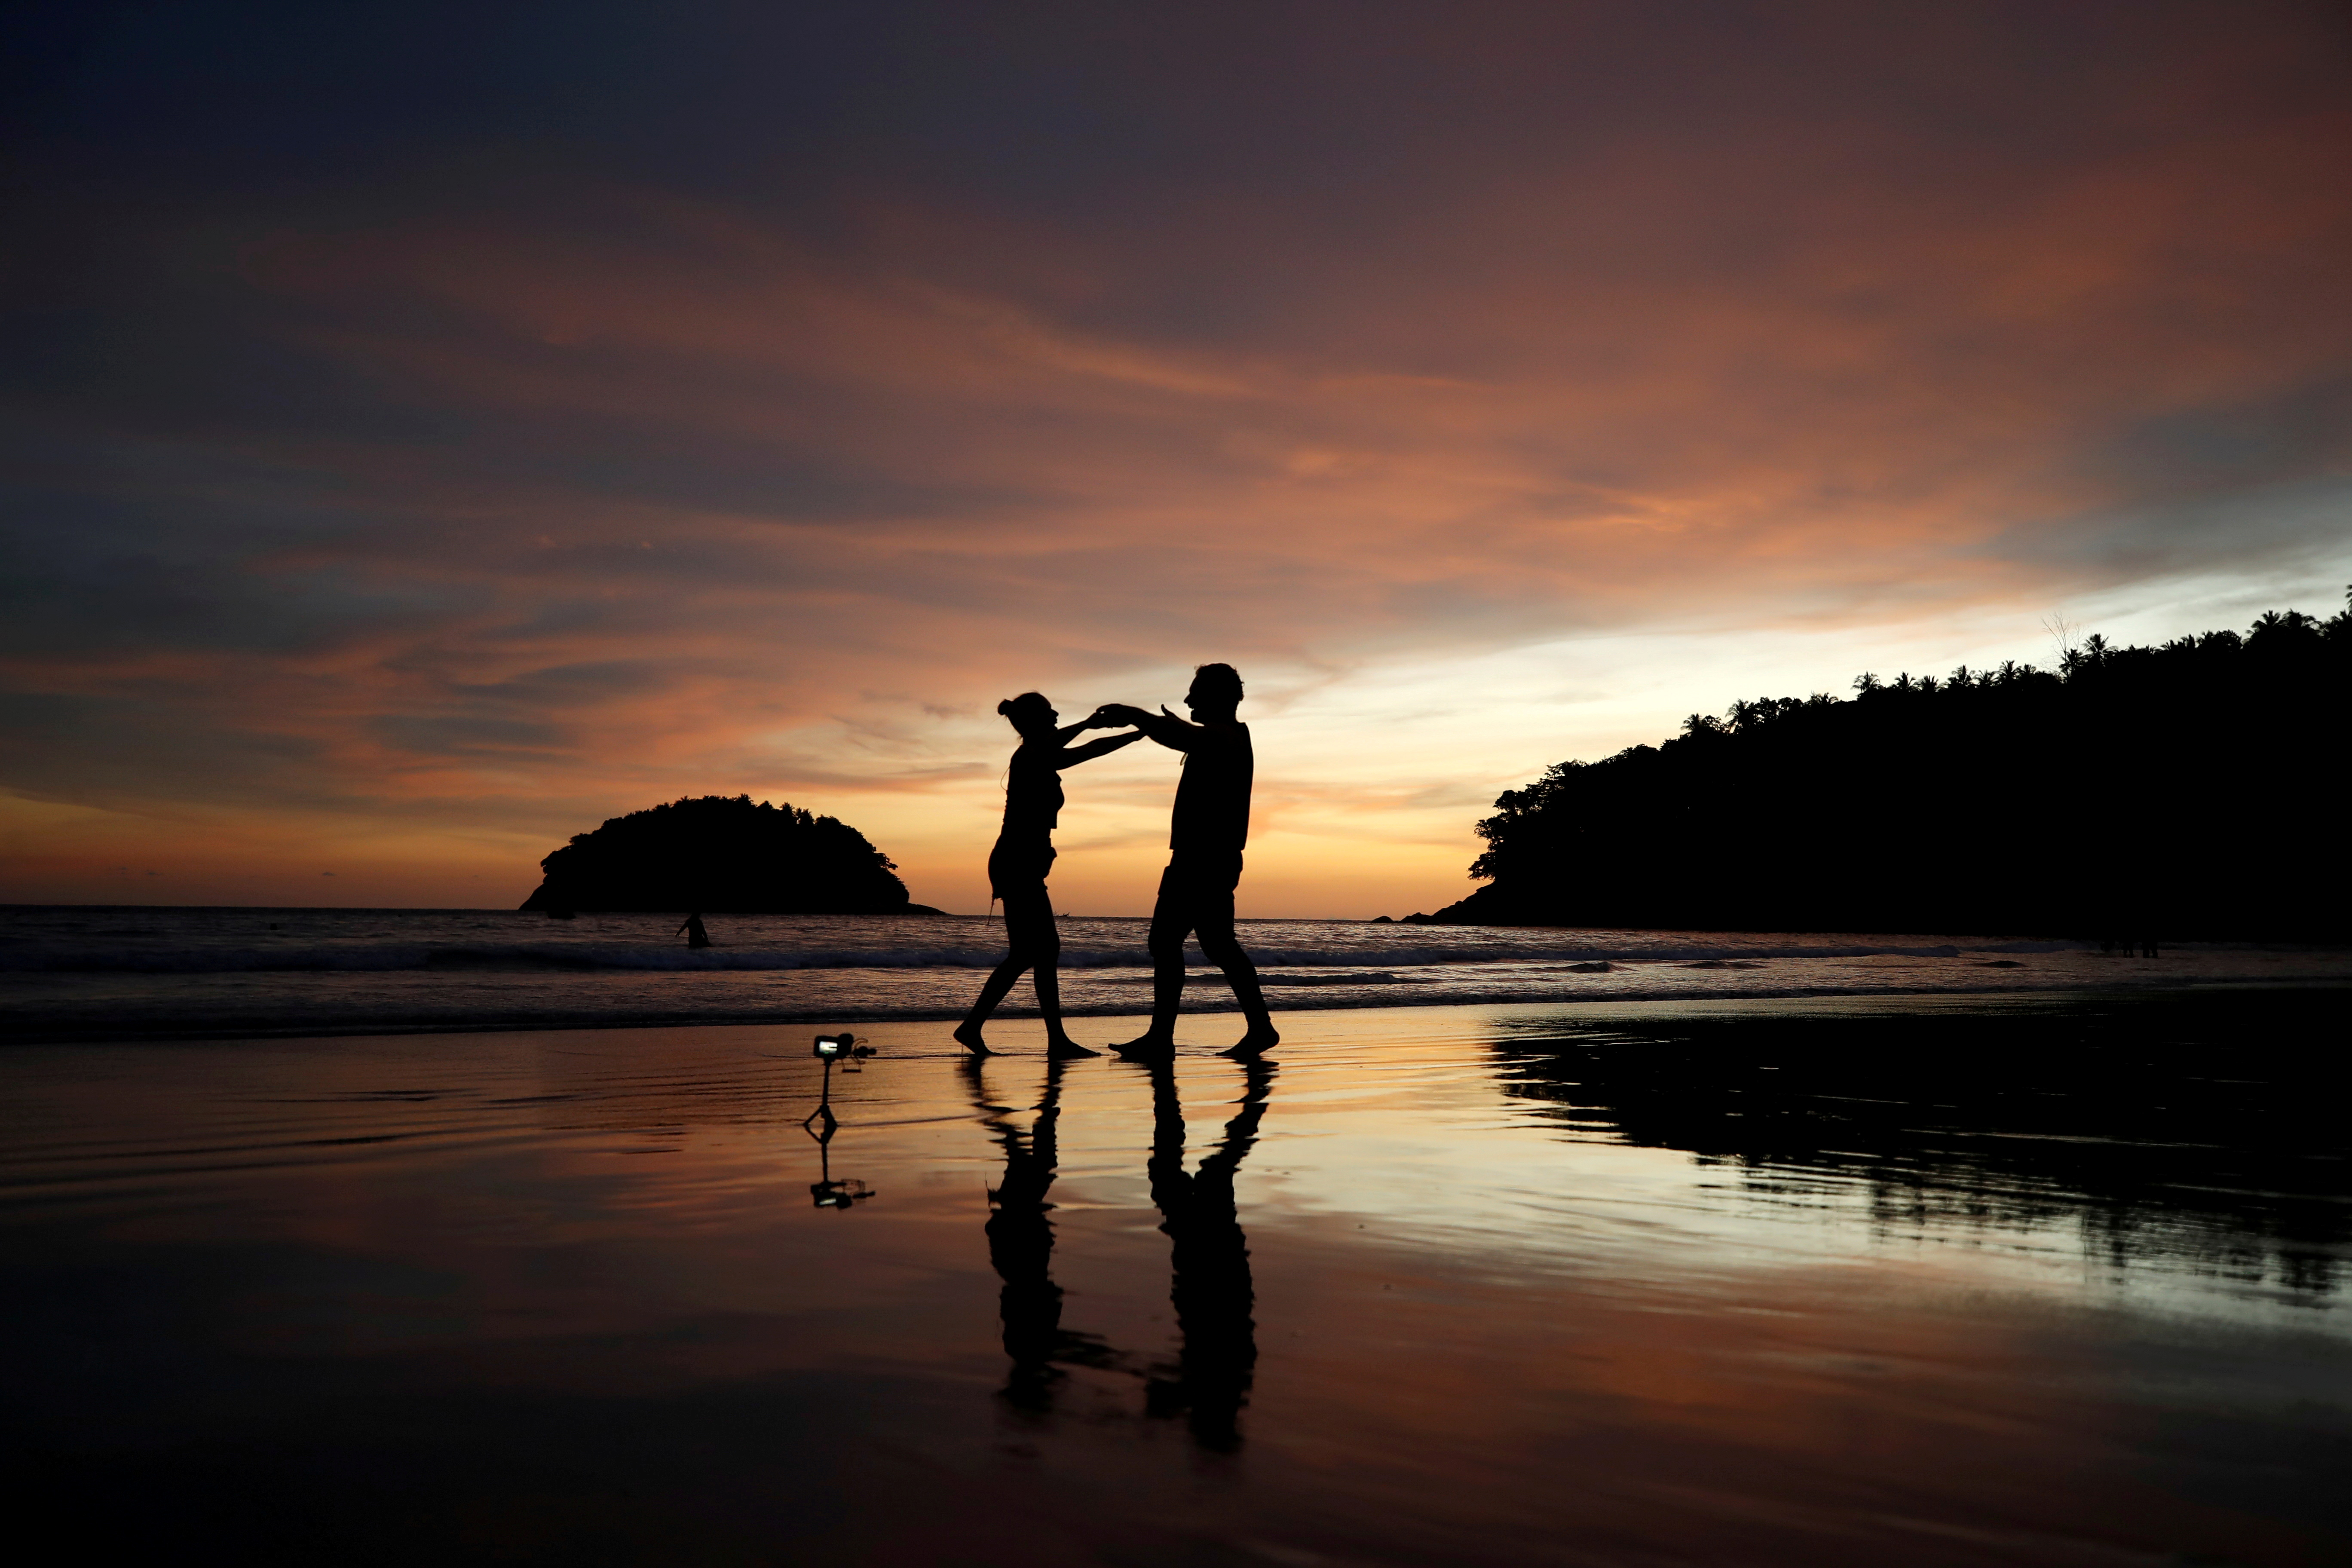 Local residents Stavros from Greece and Valina from Russia dance on an almost empty Kata beach as Phuket reopens to overseas tourists, allowing foreigners fully vaccinated against the coronavirus disease (COVID-19) to visit the resort island without quarantine, in Phuket, Thailand July 1, 2021. REUTERS/Jorge Silva/File Photo